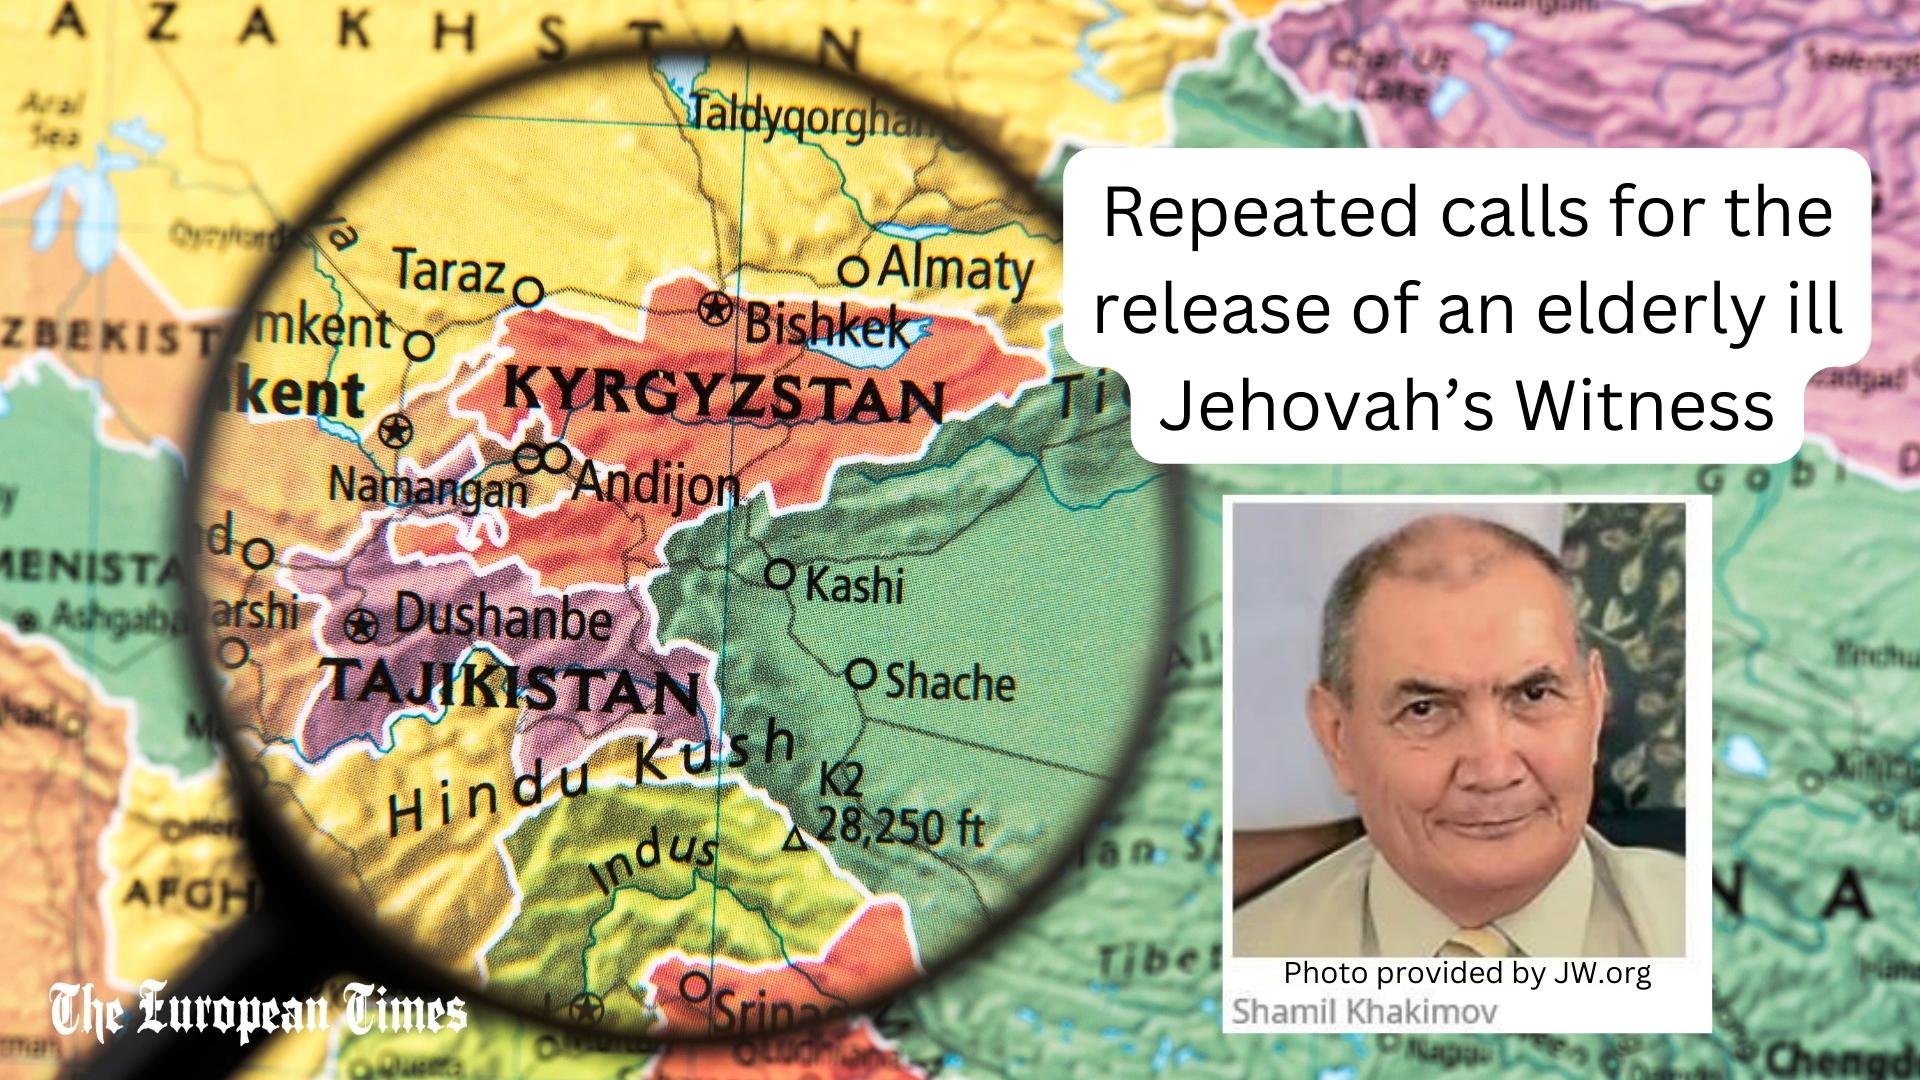 TAJIKISTAN: Repeated calls for the release of an elderly ill Jehovah’s Witness